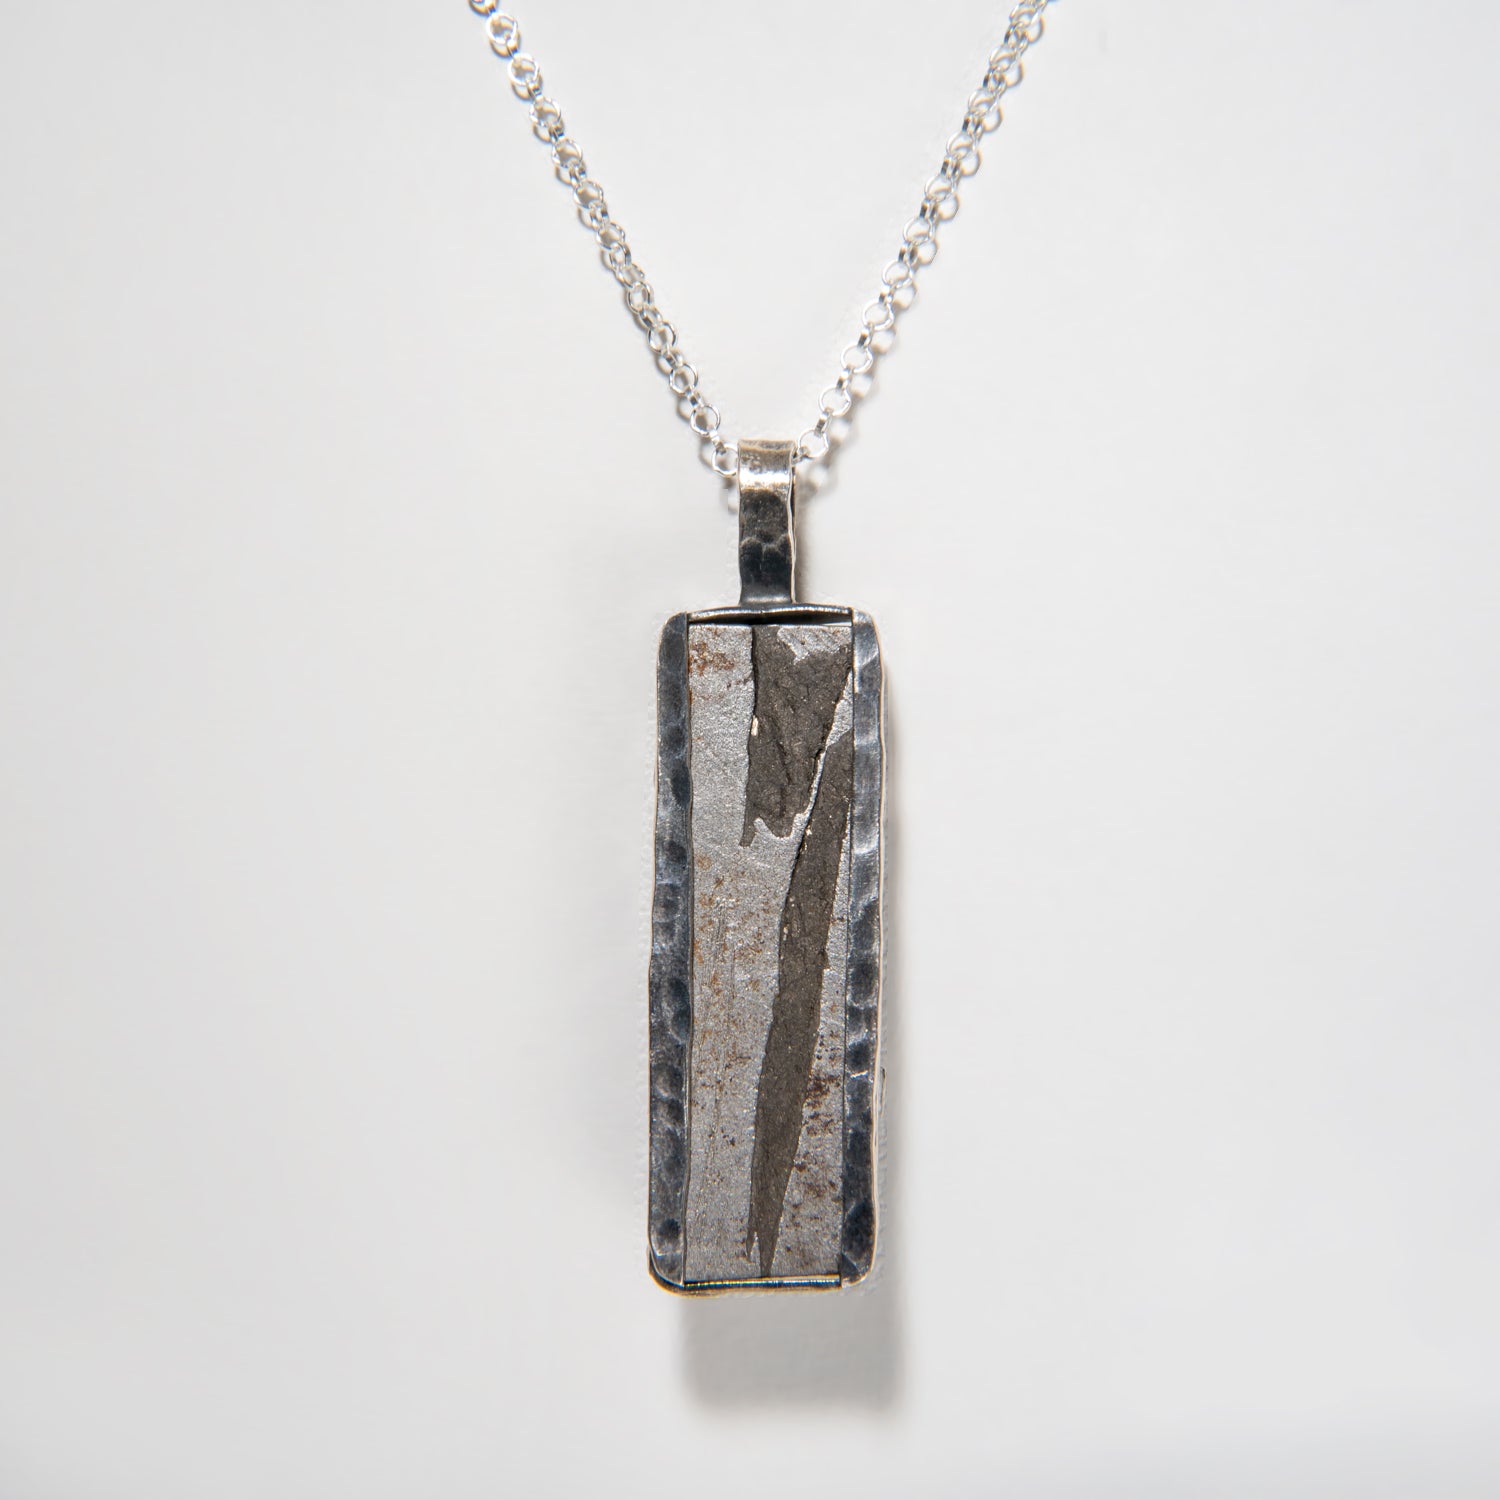 Polished Aletai Meteorite pendant (17 grams) with 18" Sterling Silver Chain